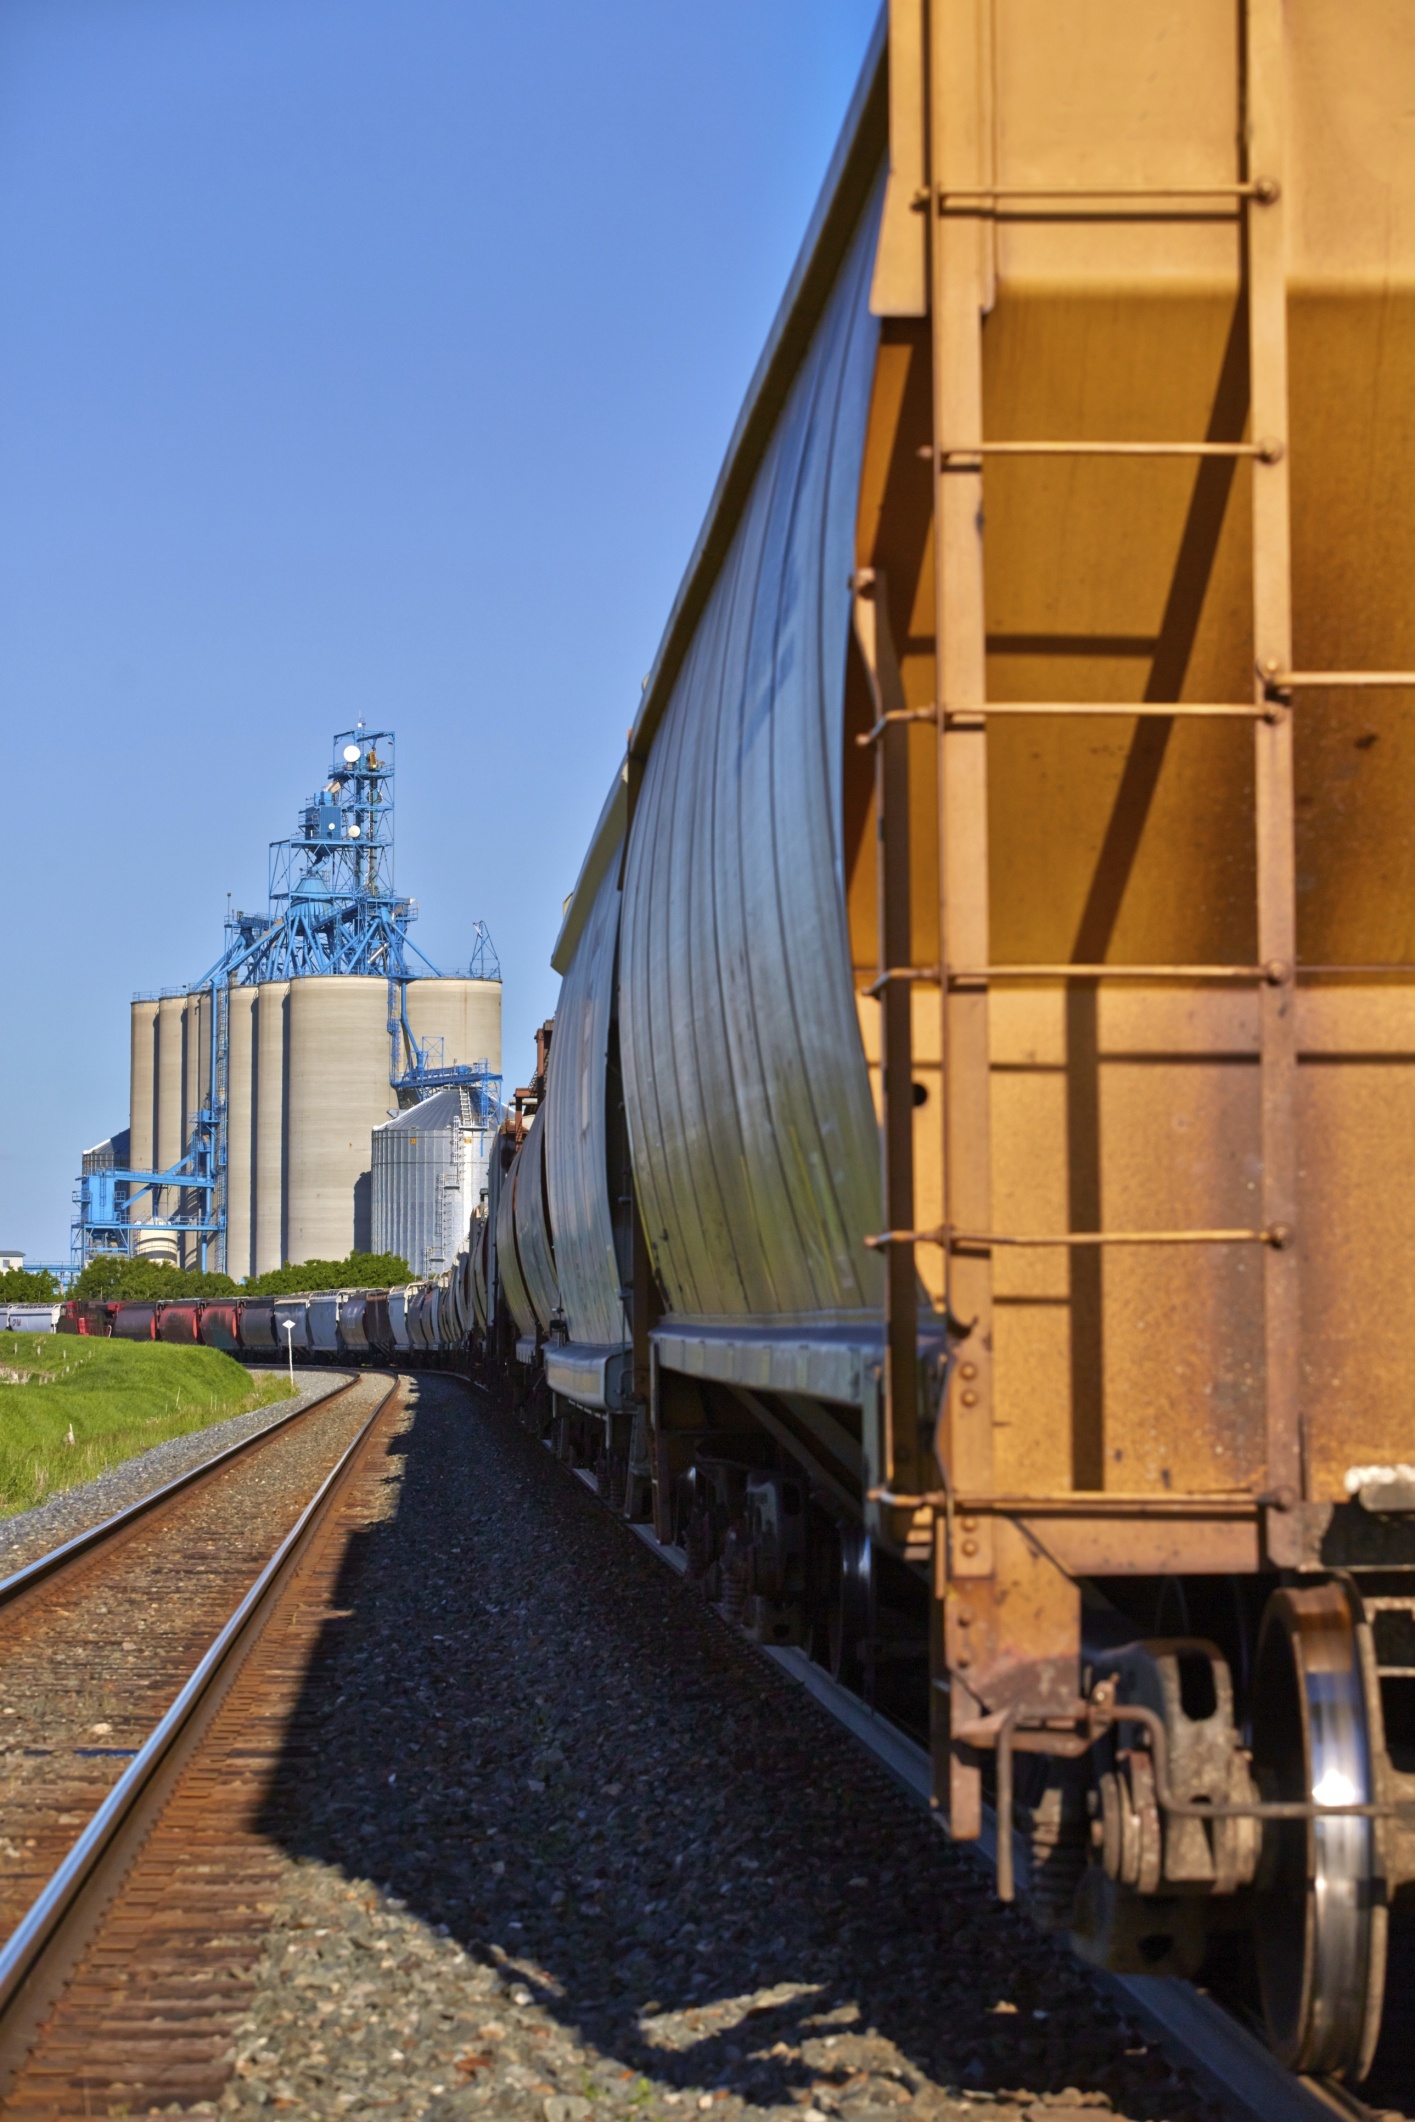 Learn how rail car spotting and orientation affect rail safety.